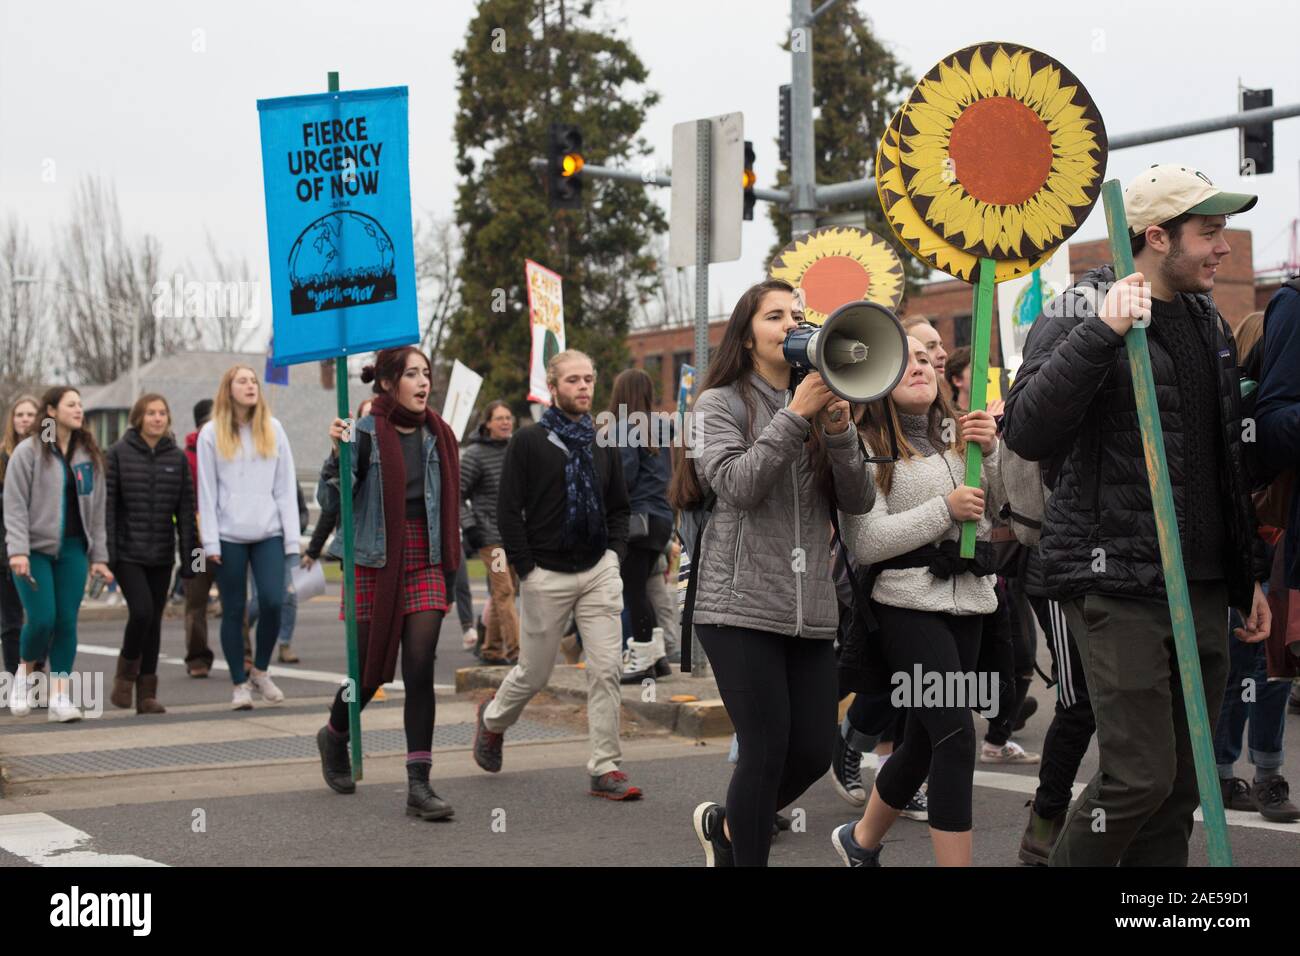 Youth marching anc chanting at the climate strike rally in Eugene, Oregon, USA. Stock Photo